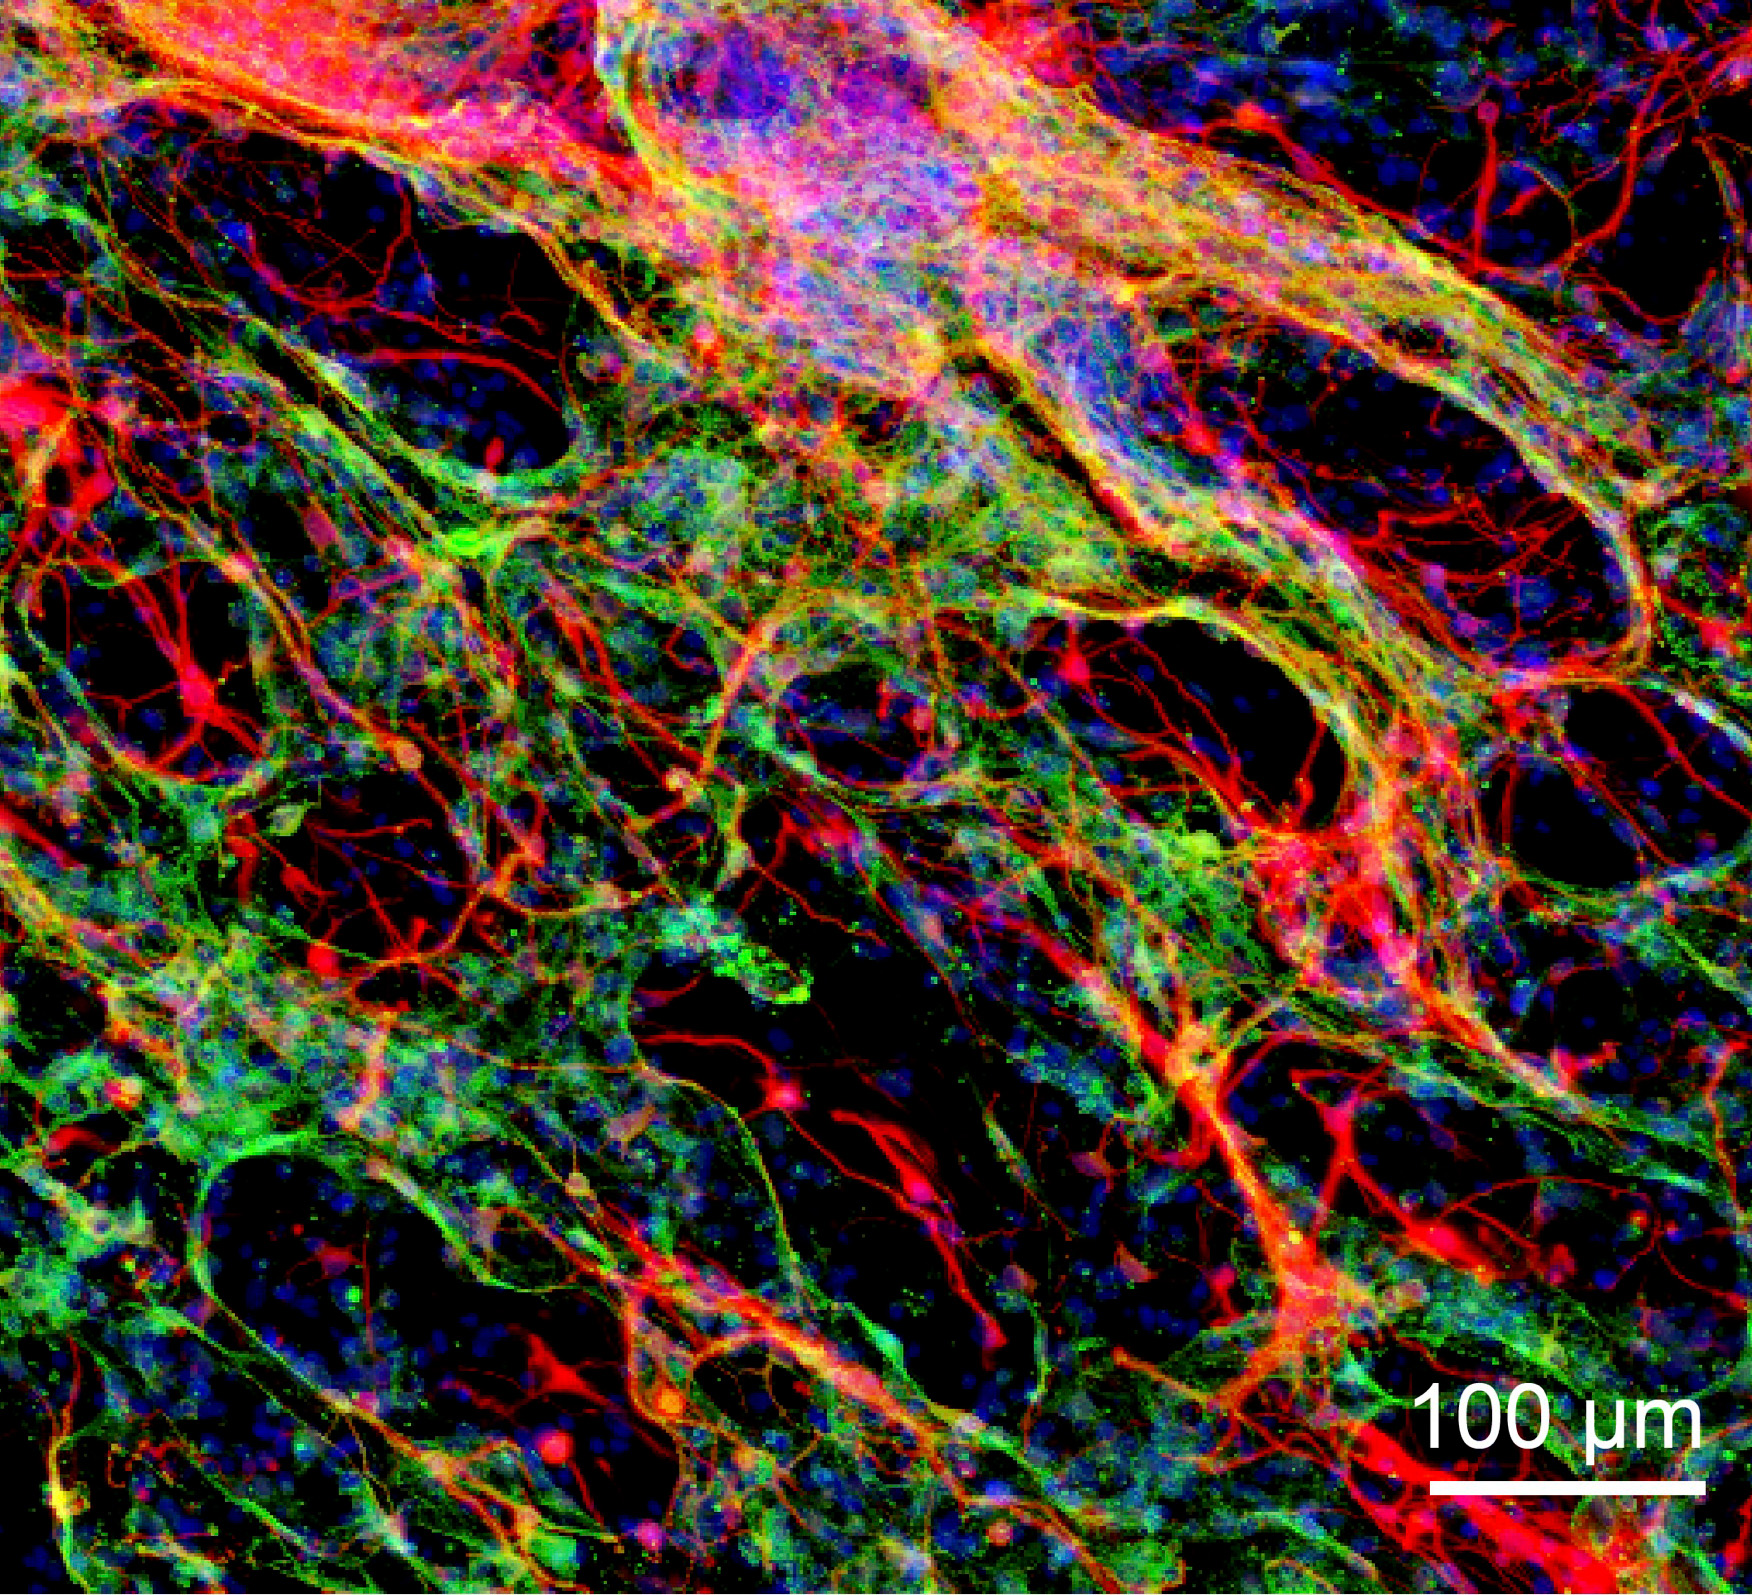 Immunofluorescence image of neurons and astrocyte cells in the engineered hydrogel (Satoshi Tanikawa, et al. Scientific Reports. February 14, 2023).